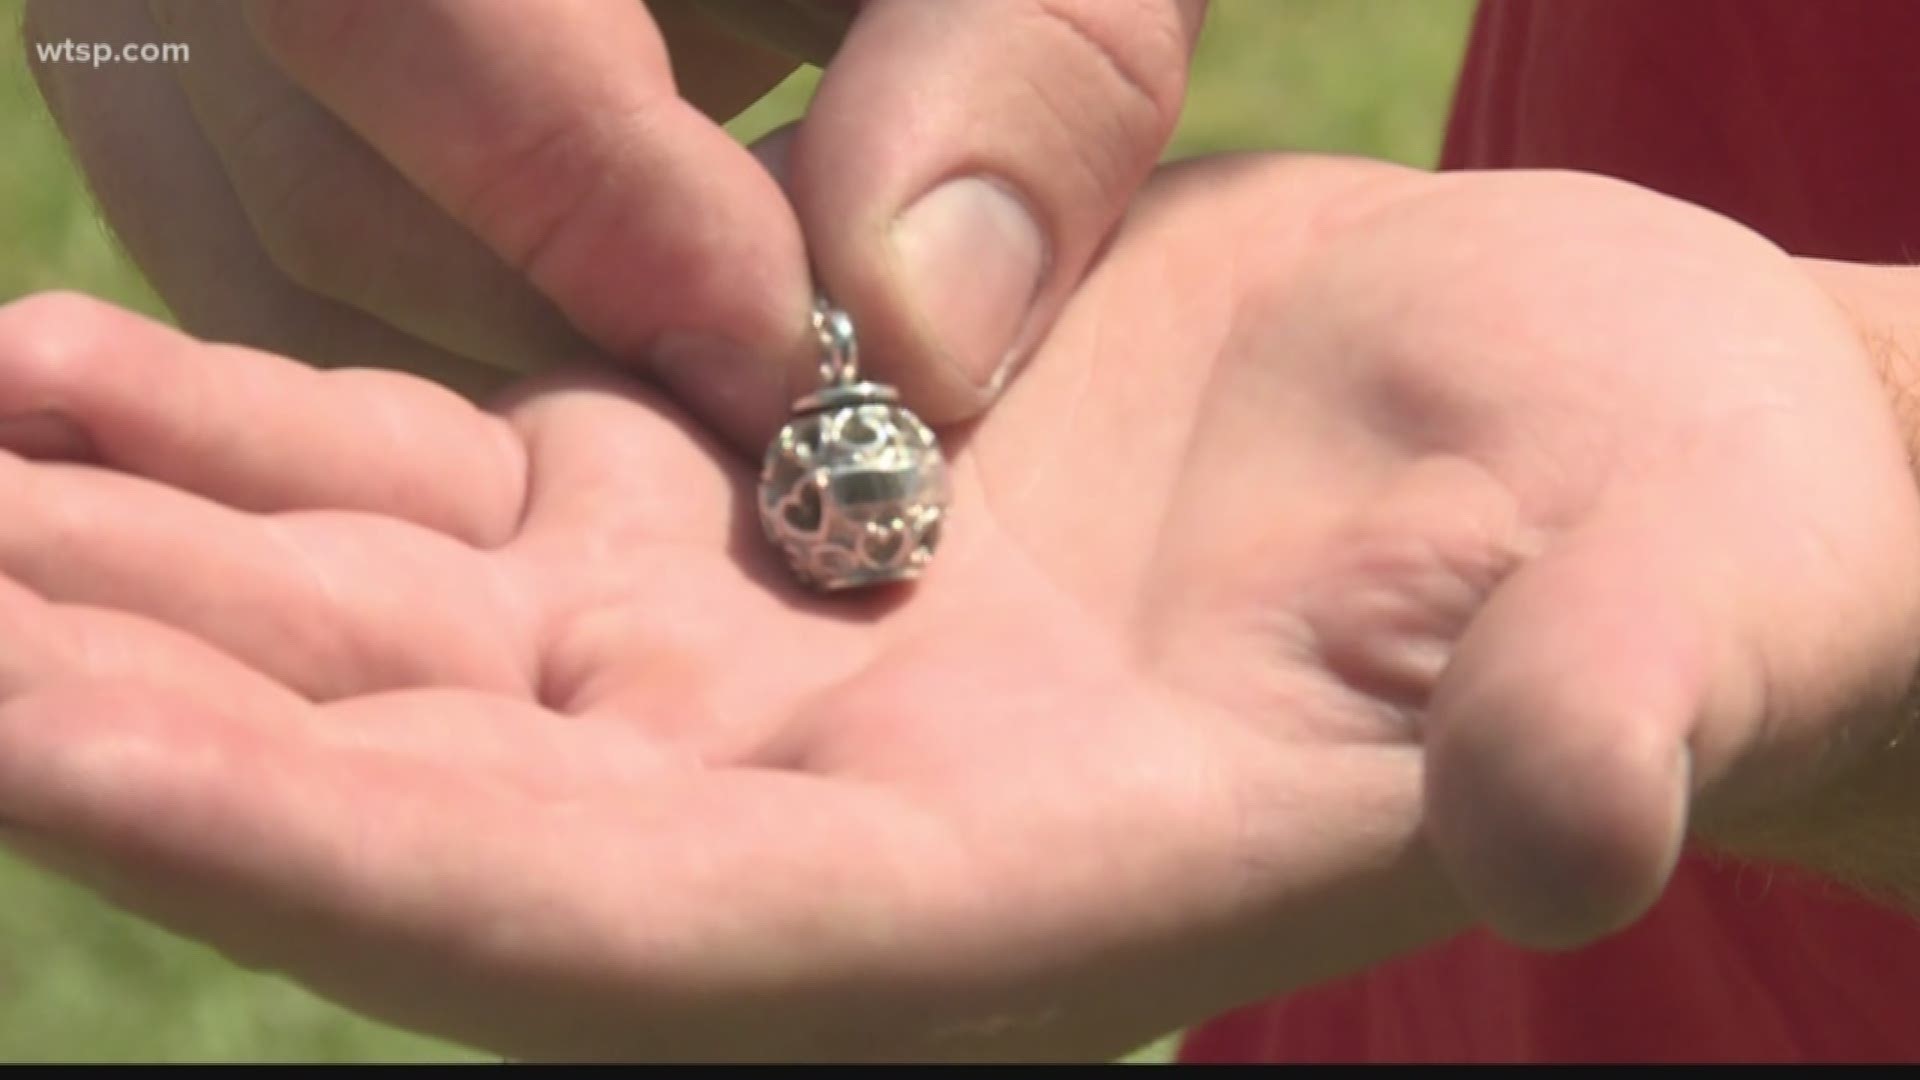 A man swimming Sunday night at Siesta Key Beach found a necklace with someone’s mother’s ashes inside.

Shawn Rauch is hoping to find the rightful owner.

Rauch posted to Facebook on Monday afternoon of the silver necklace with the word "Mom” inscribed in the middle of it.